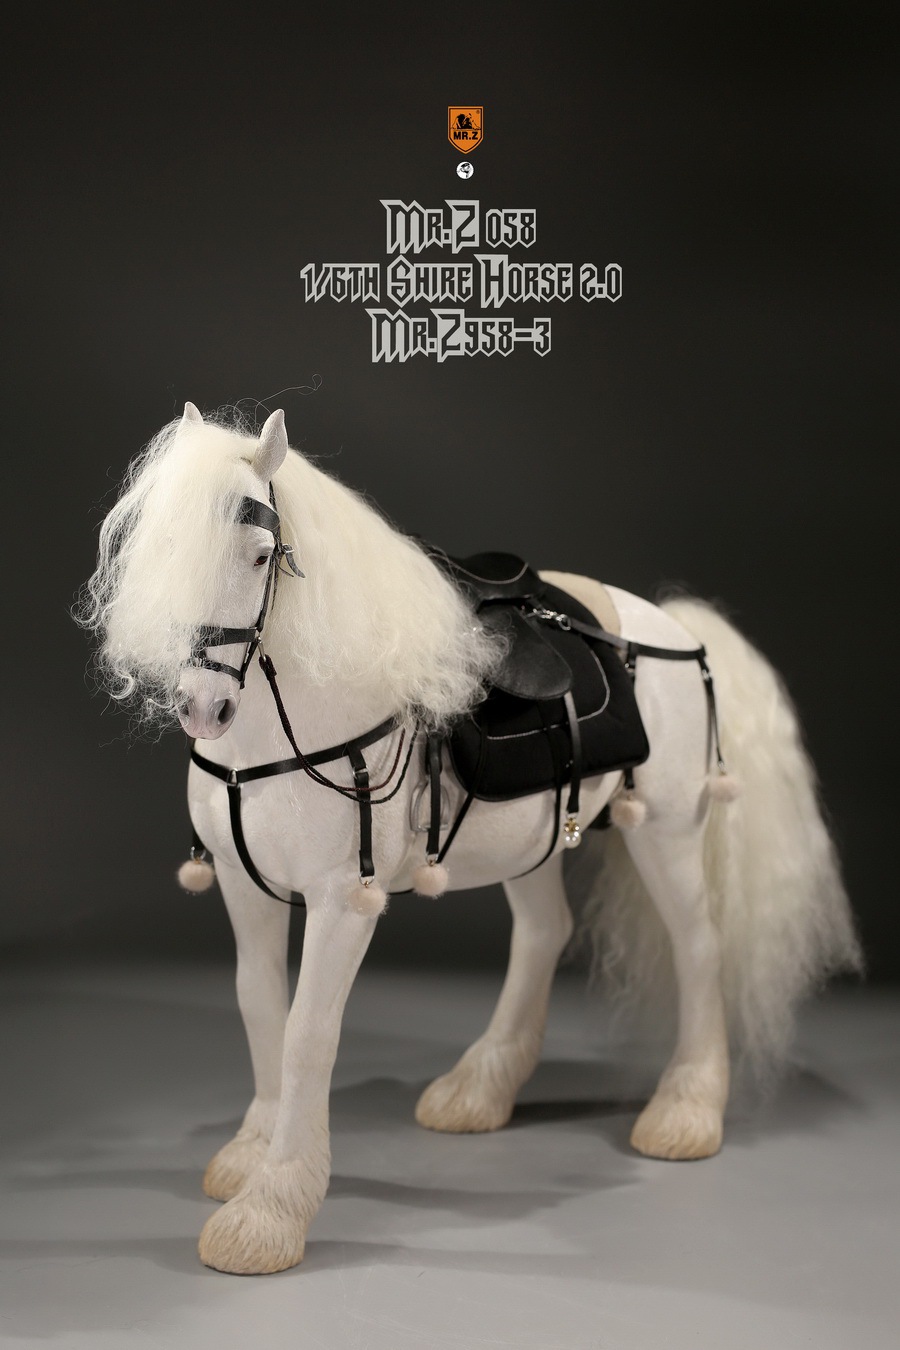 NEW PRODUCT: MR. Z: 58th round-Shire Horse 2.0 version full set of 5 colors  08575310